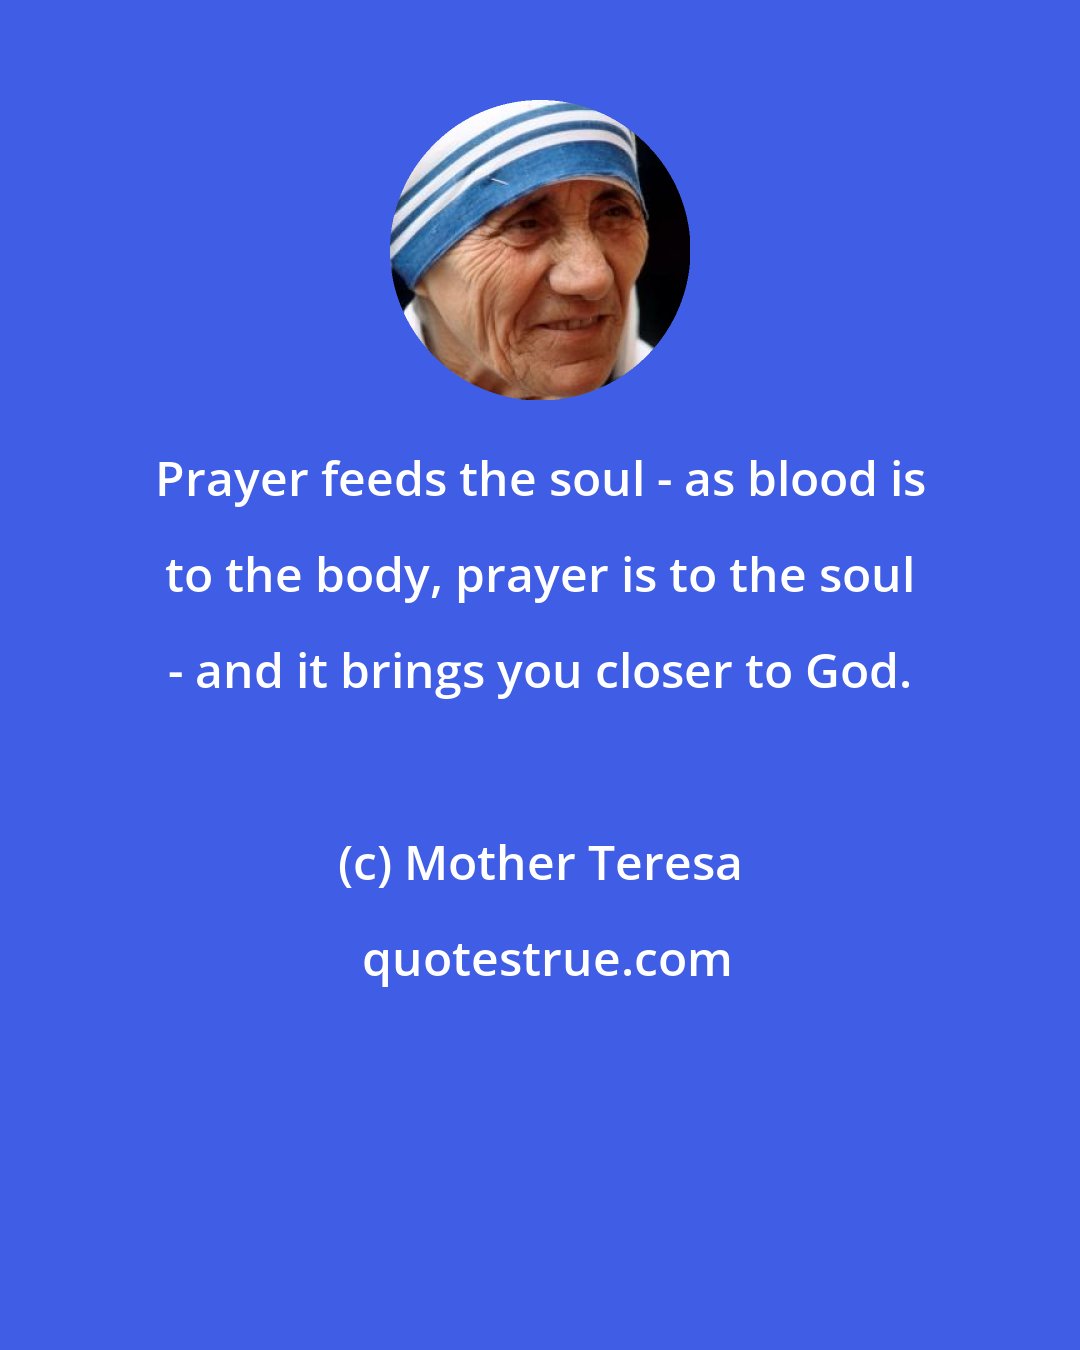 Mother Teresa: Prayer feeds the soul - as blood is to the body, prayer is to the soul - and it brings you closer to God.